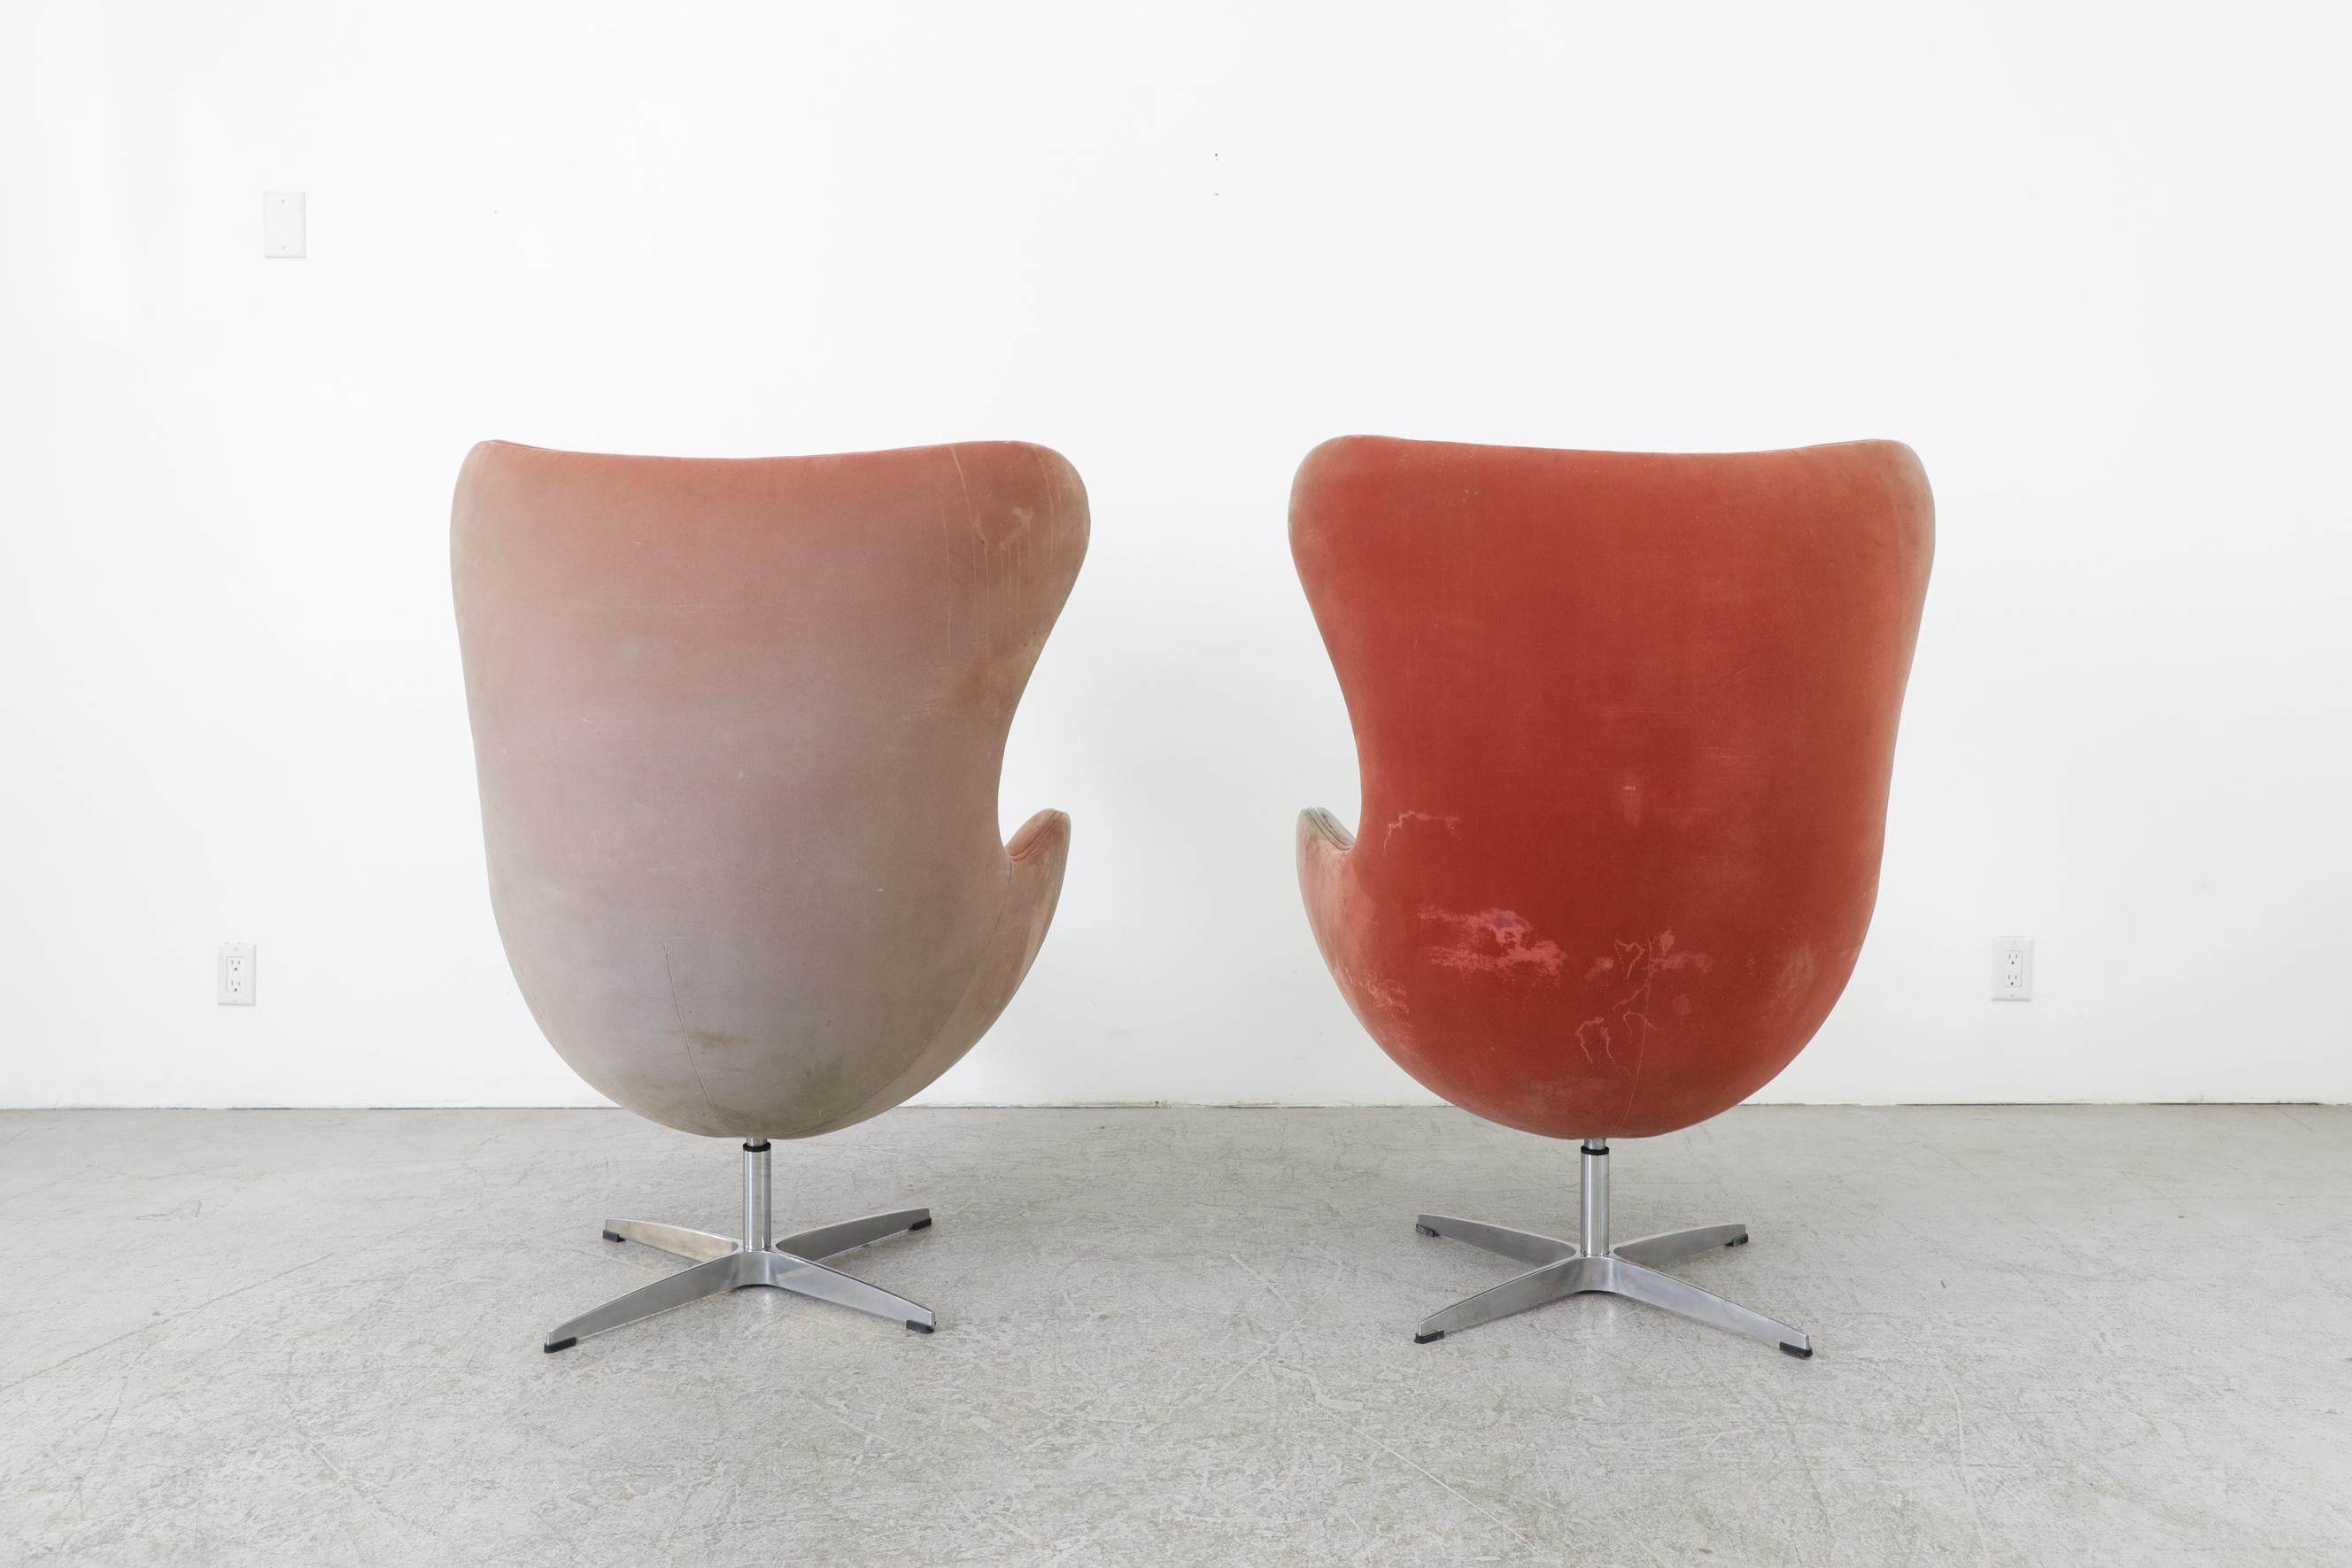 Pair of Original Arne Jacobsen (attributed) Egg Chairs, 1958 1